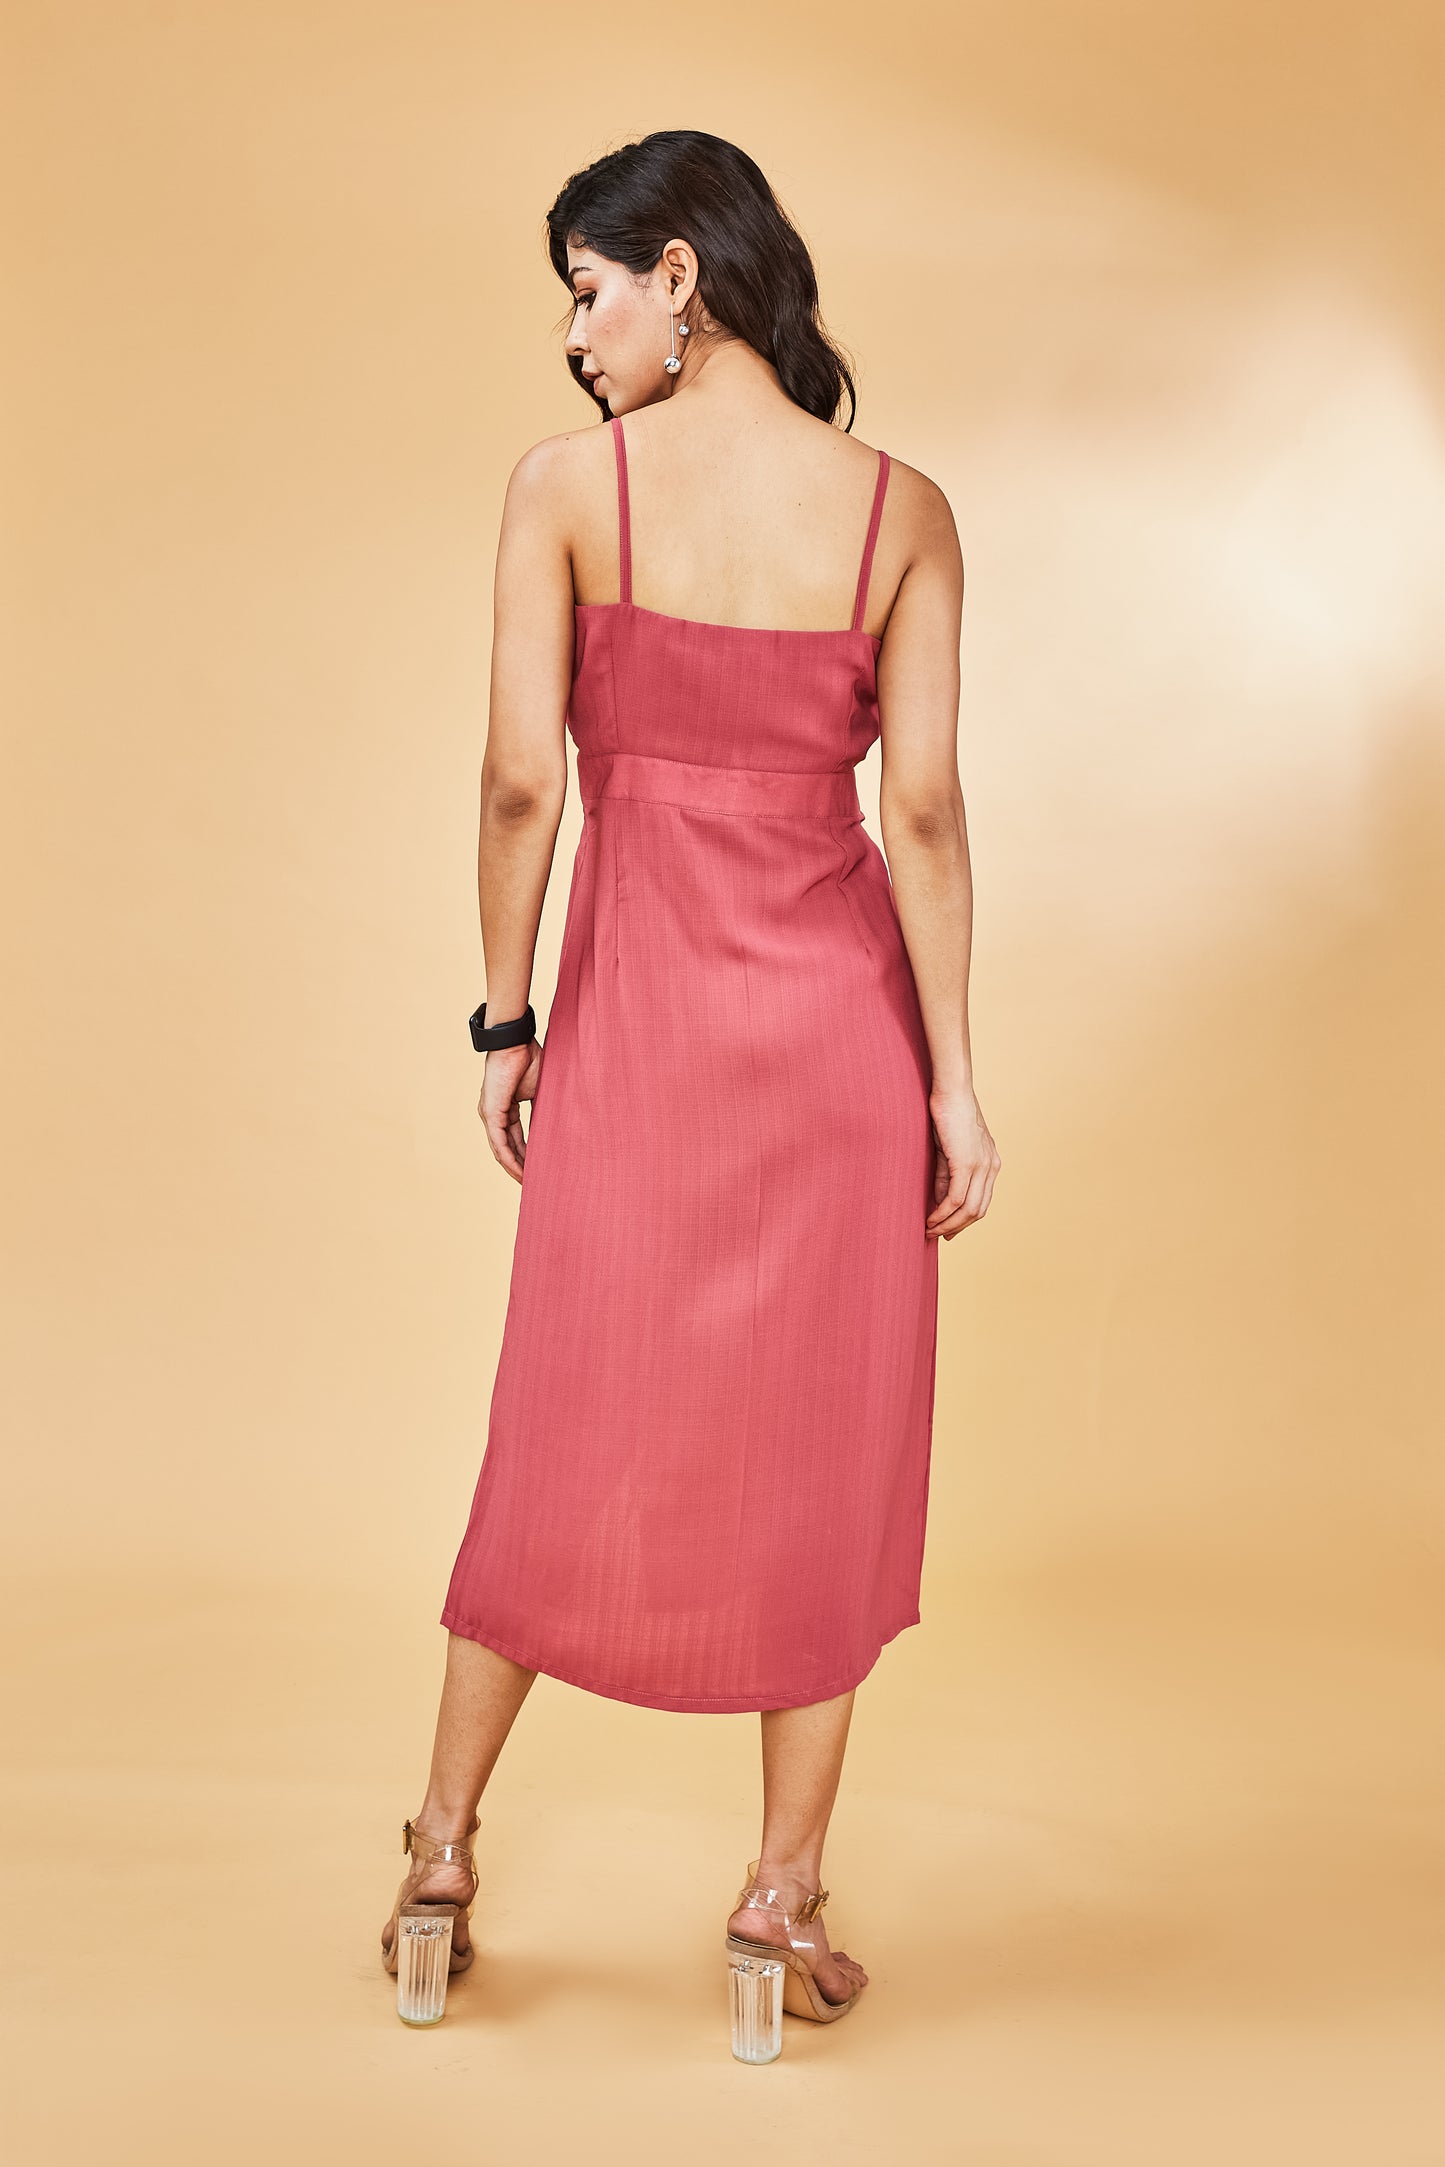 Rose pink cut-out dress